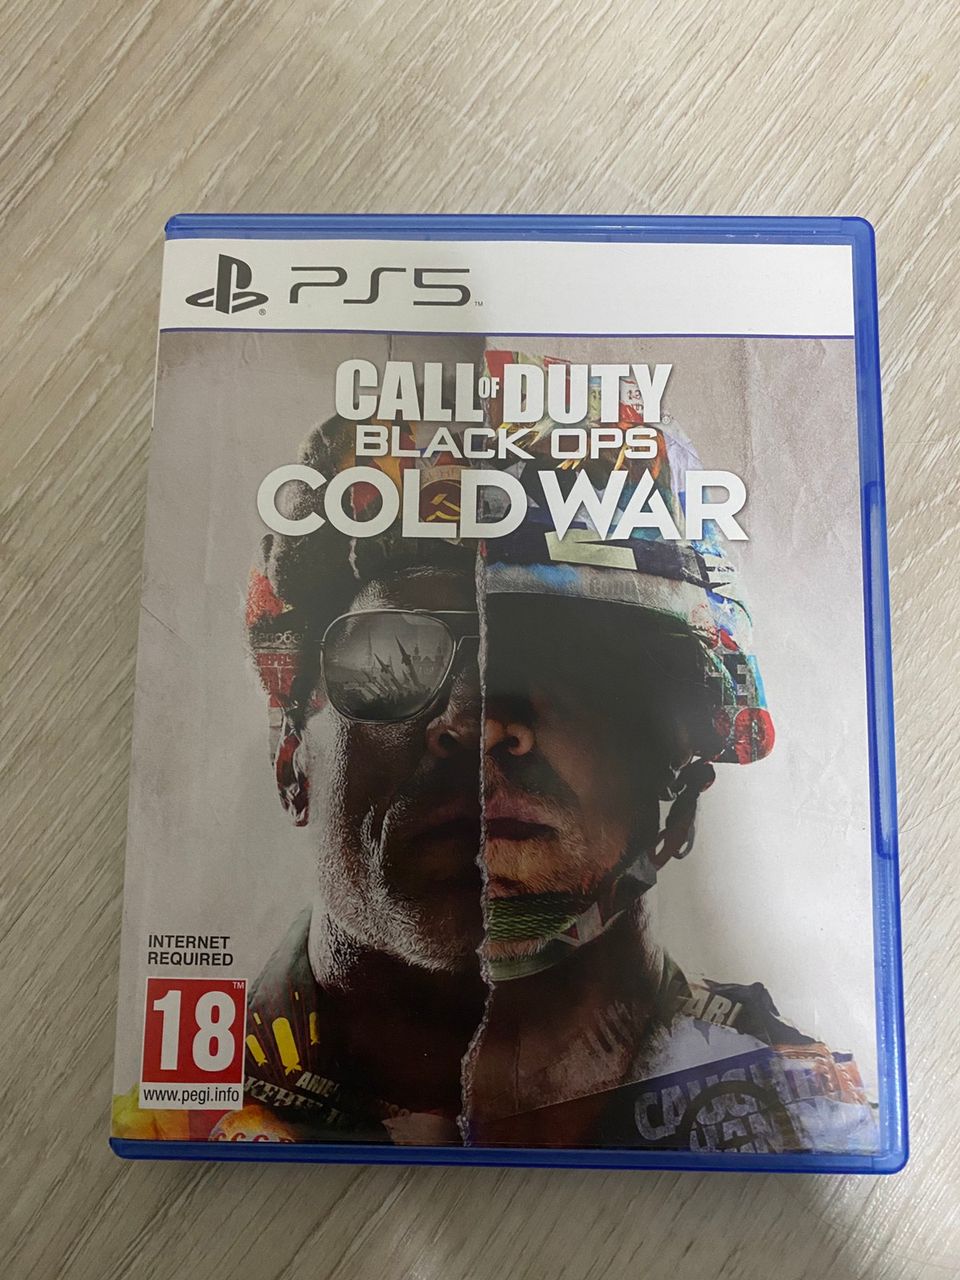 Call of duty cold war ps5